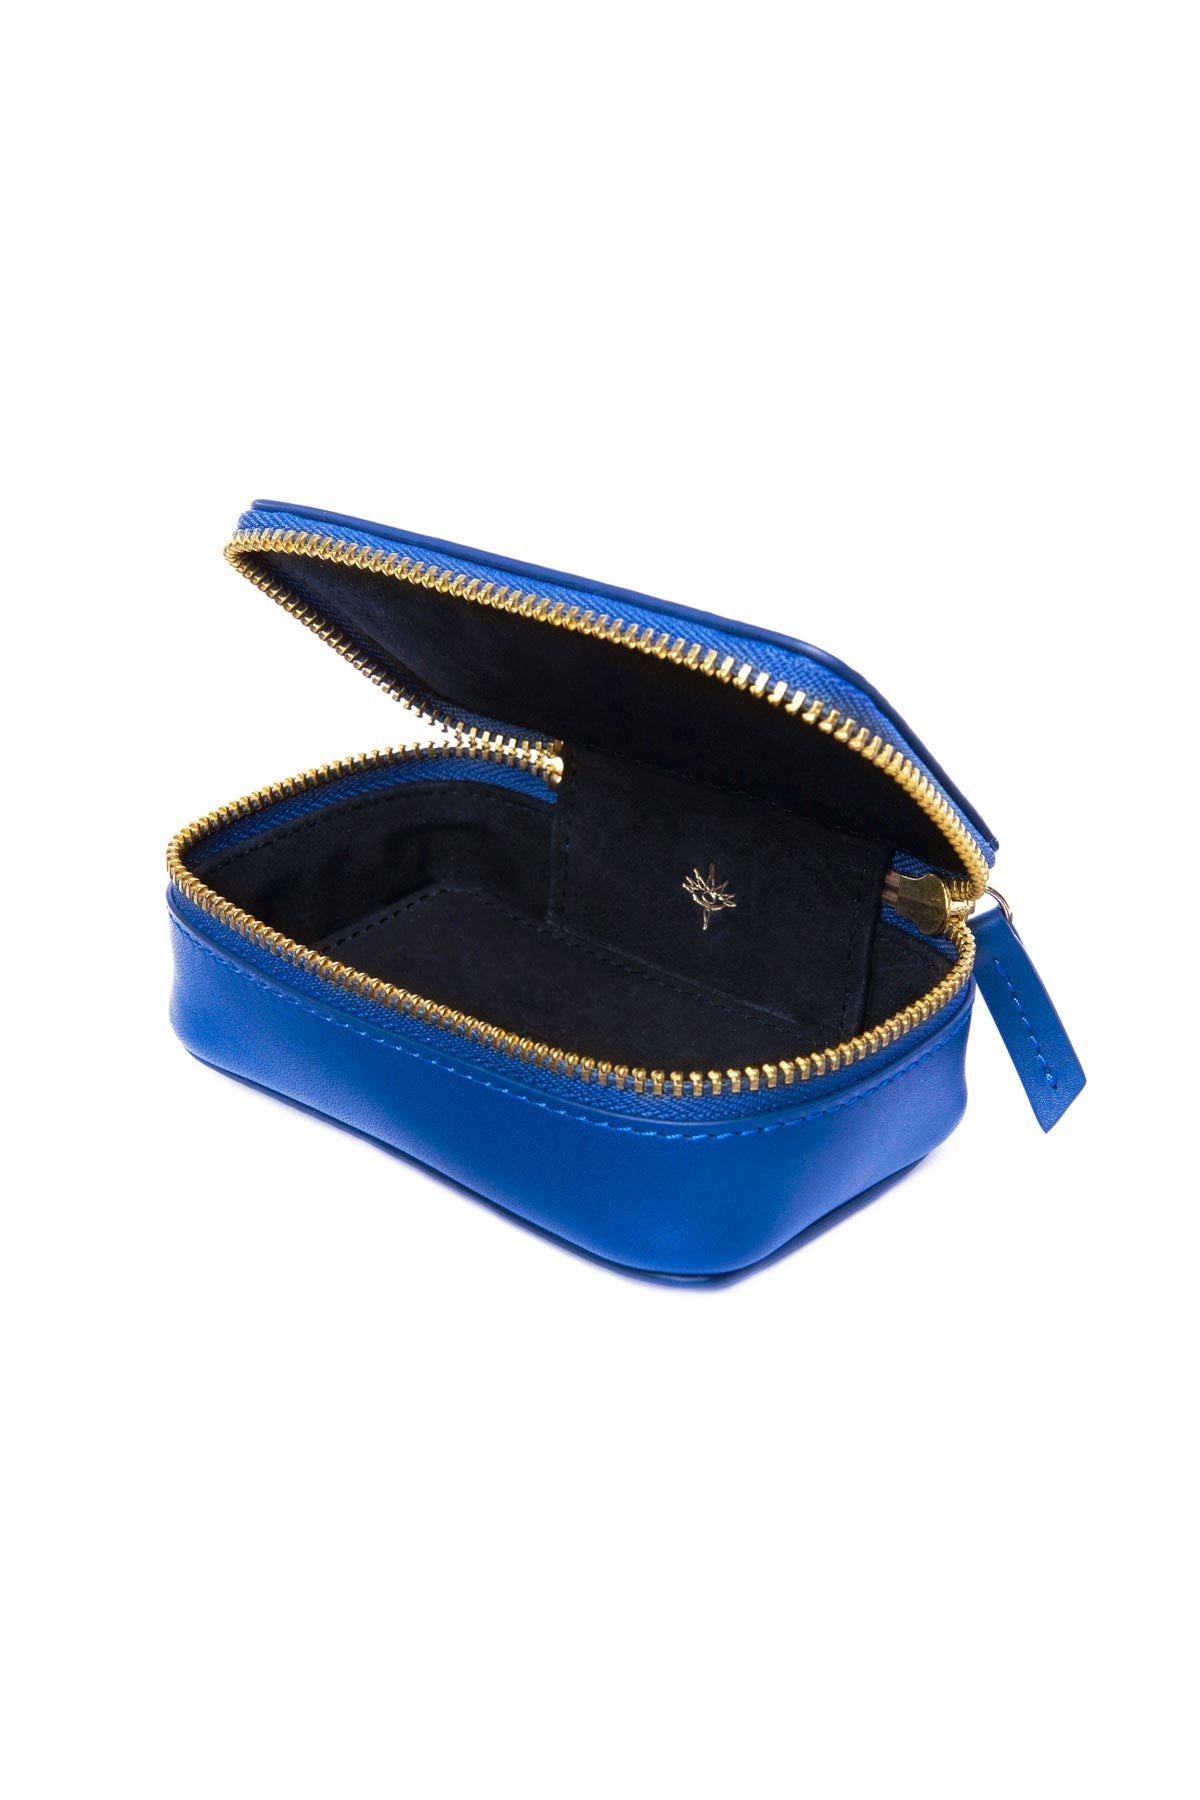 Leather Jewellery Case - Royal Blue